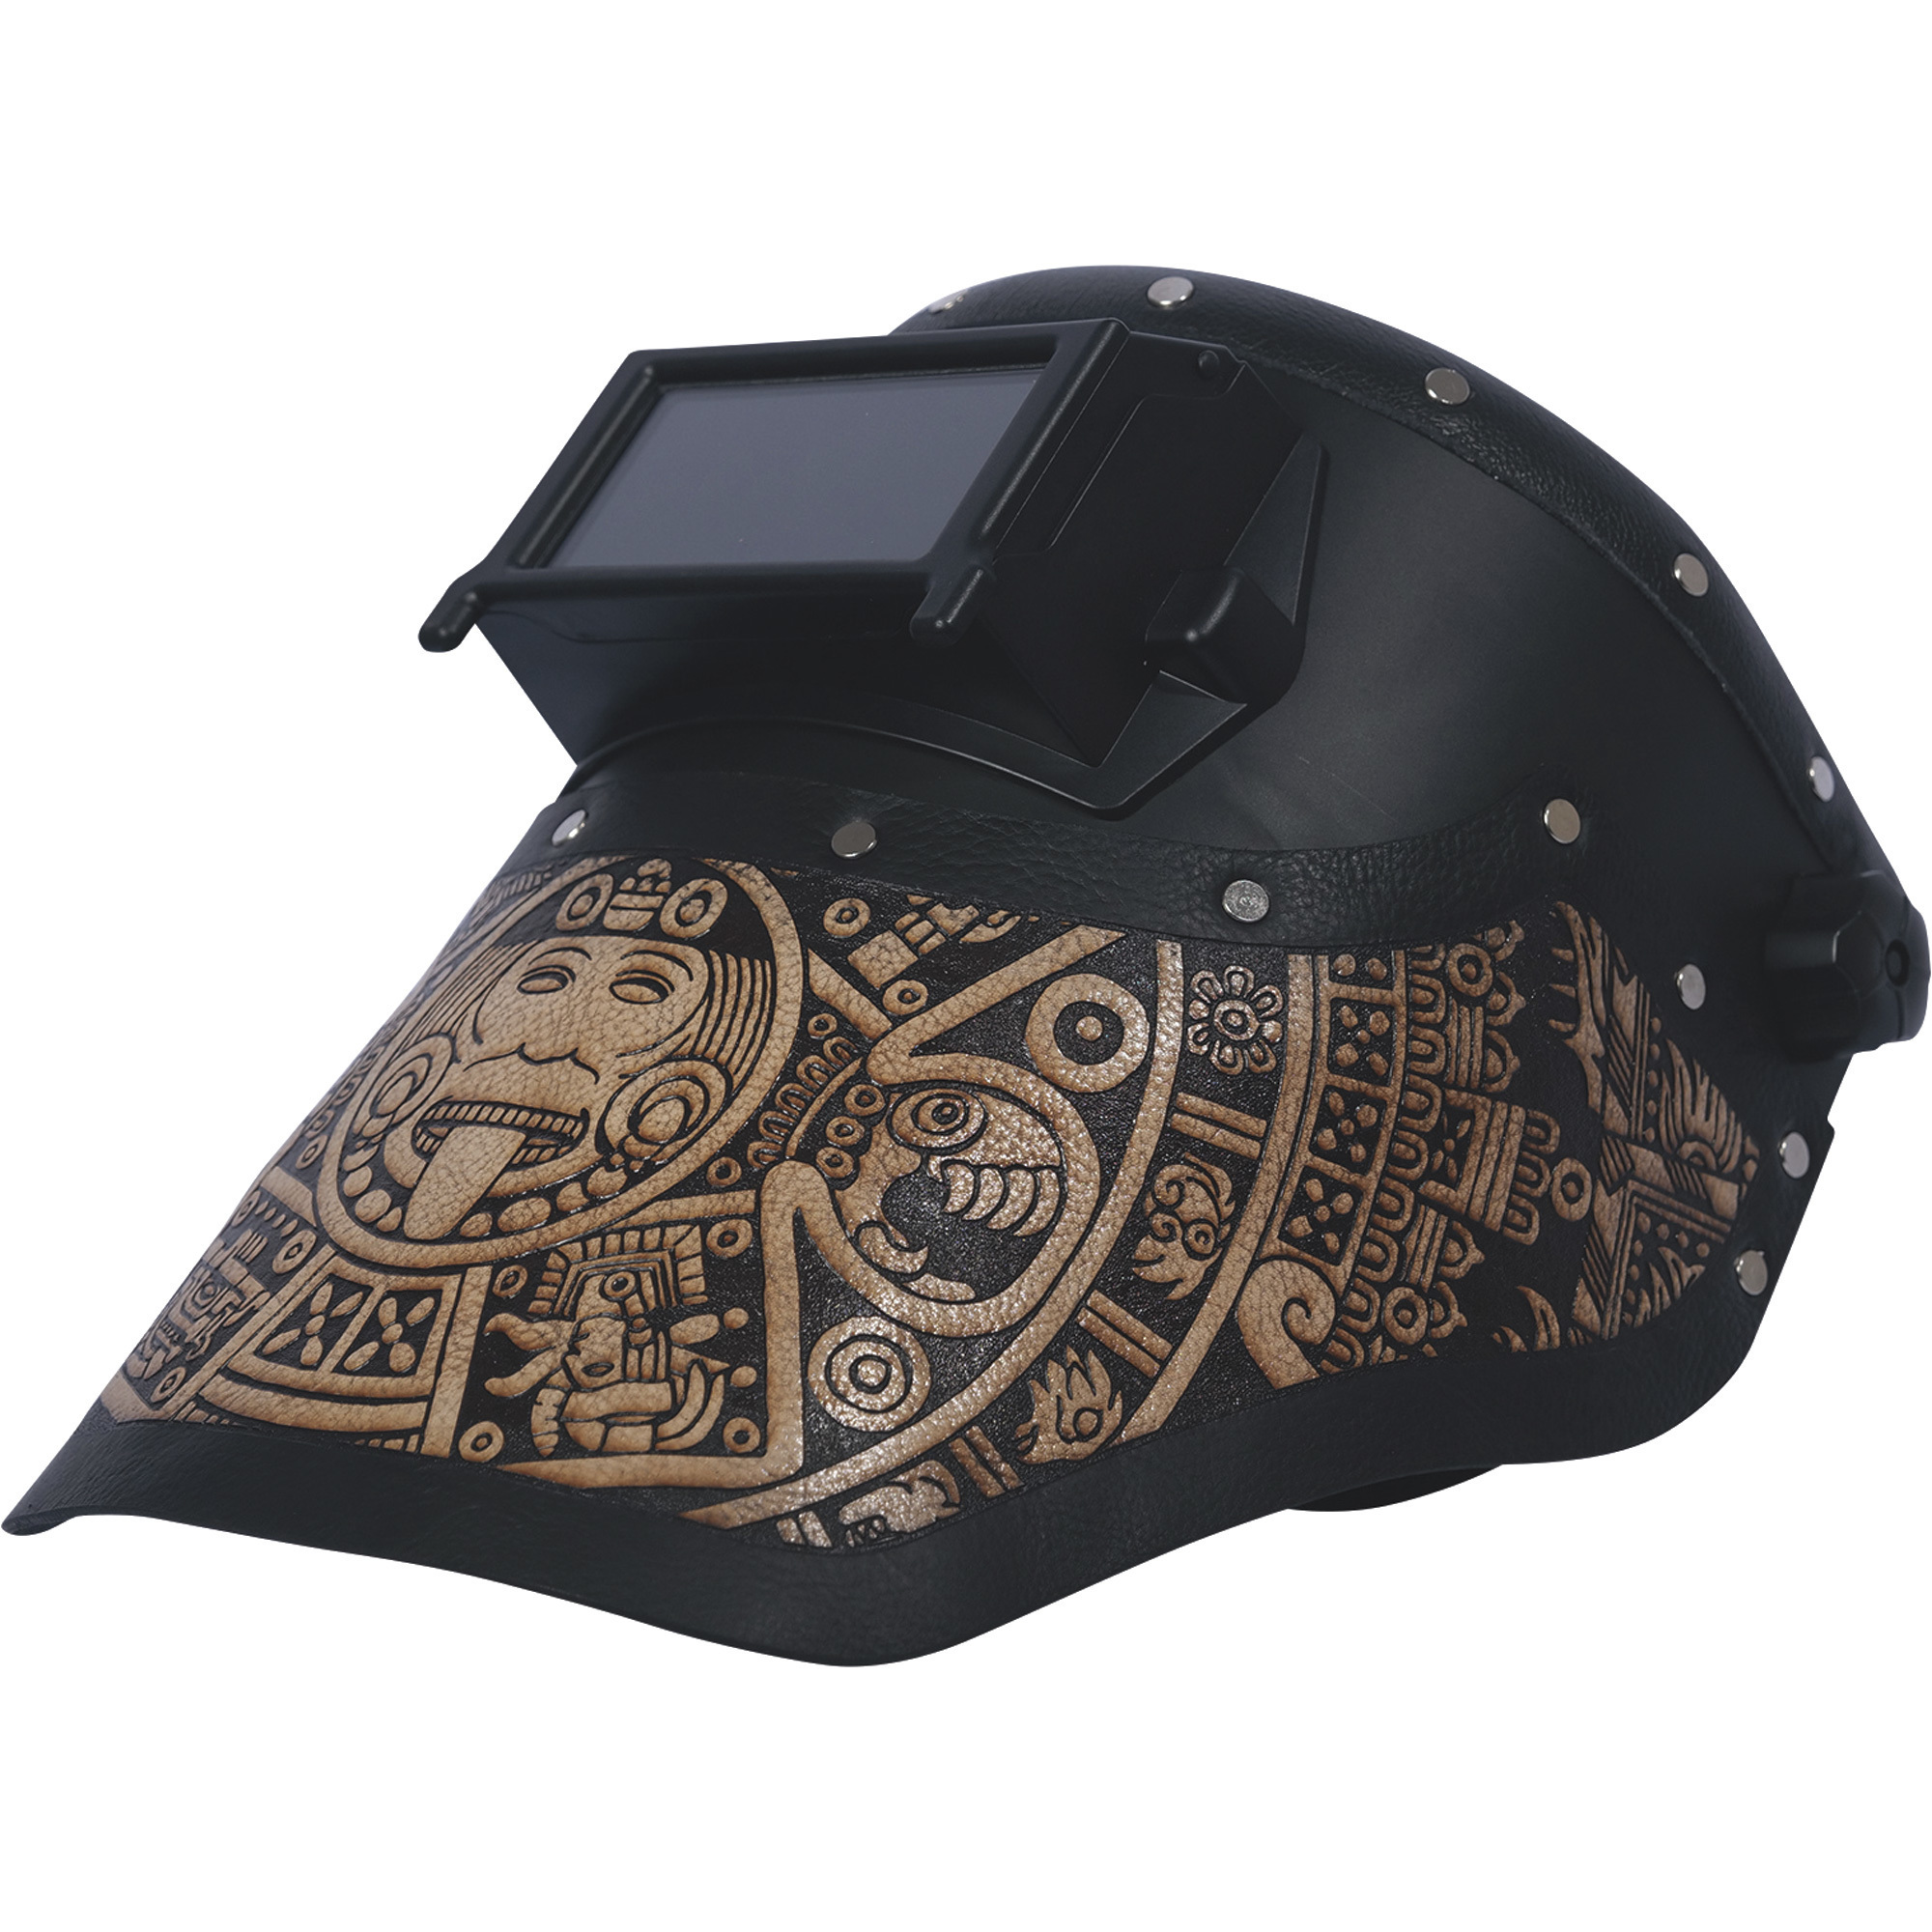 Outlaw Leather Welding Hood with Shade 10 â 2Inch x 4 1/4Inch Filter, Aztec Black, Model OL-AZNB-101